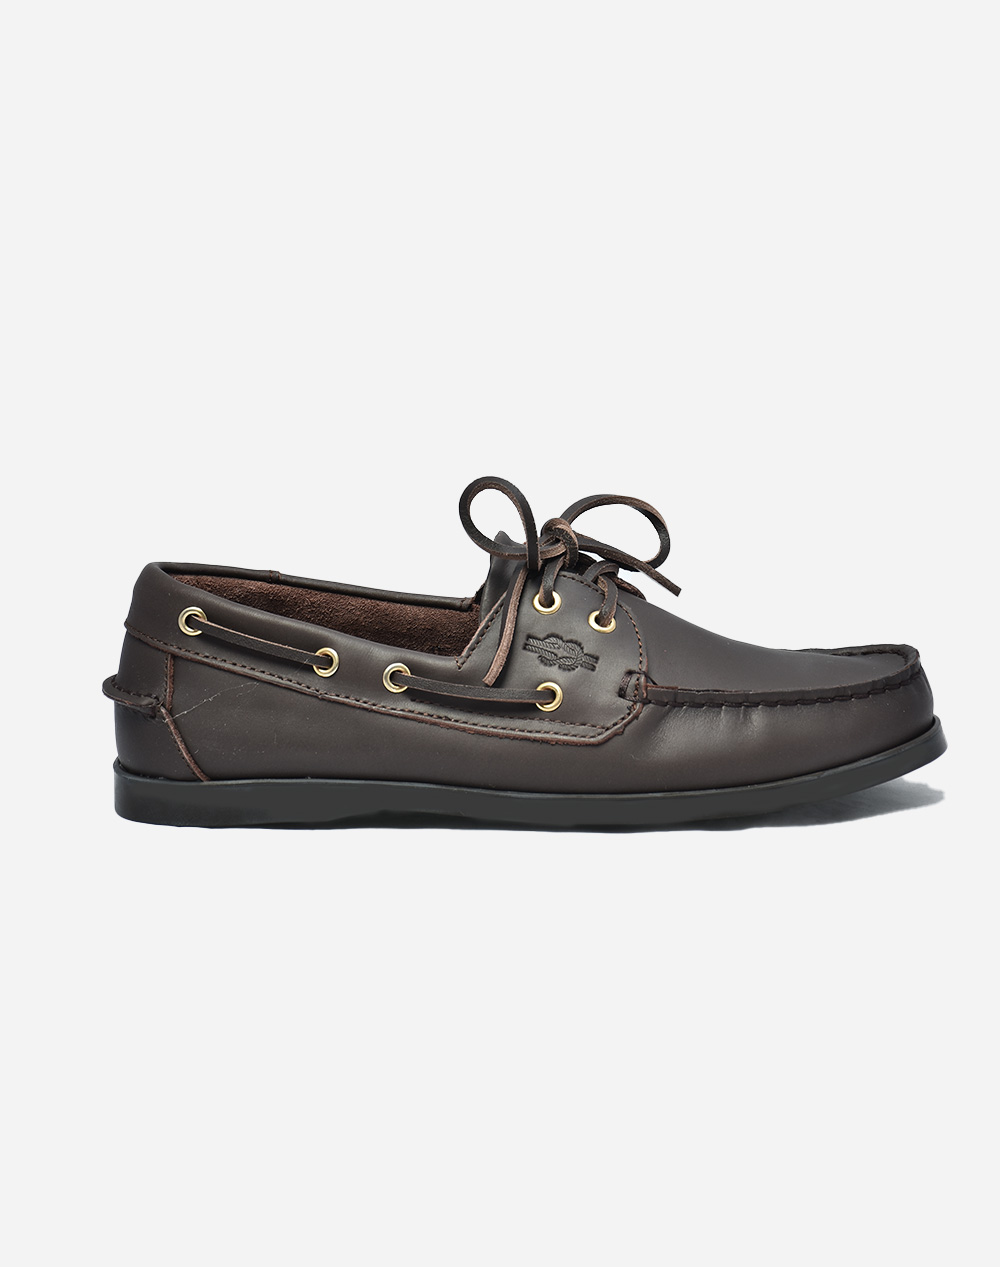 CHICAGO CHICAGO SHOES 123-366-870-BROW Moccasin